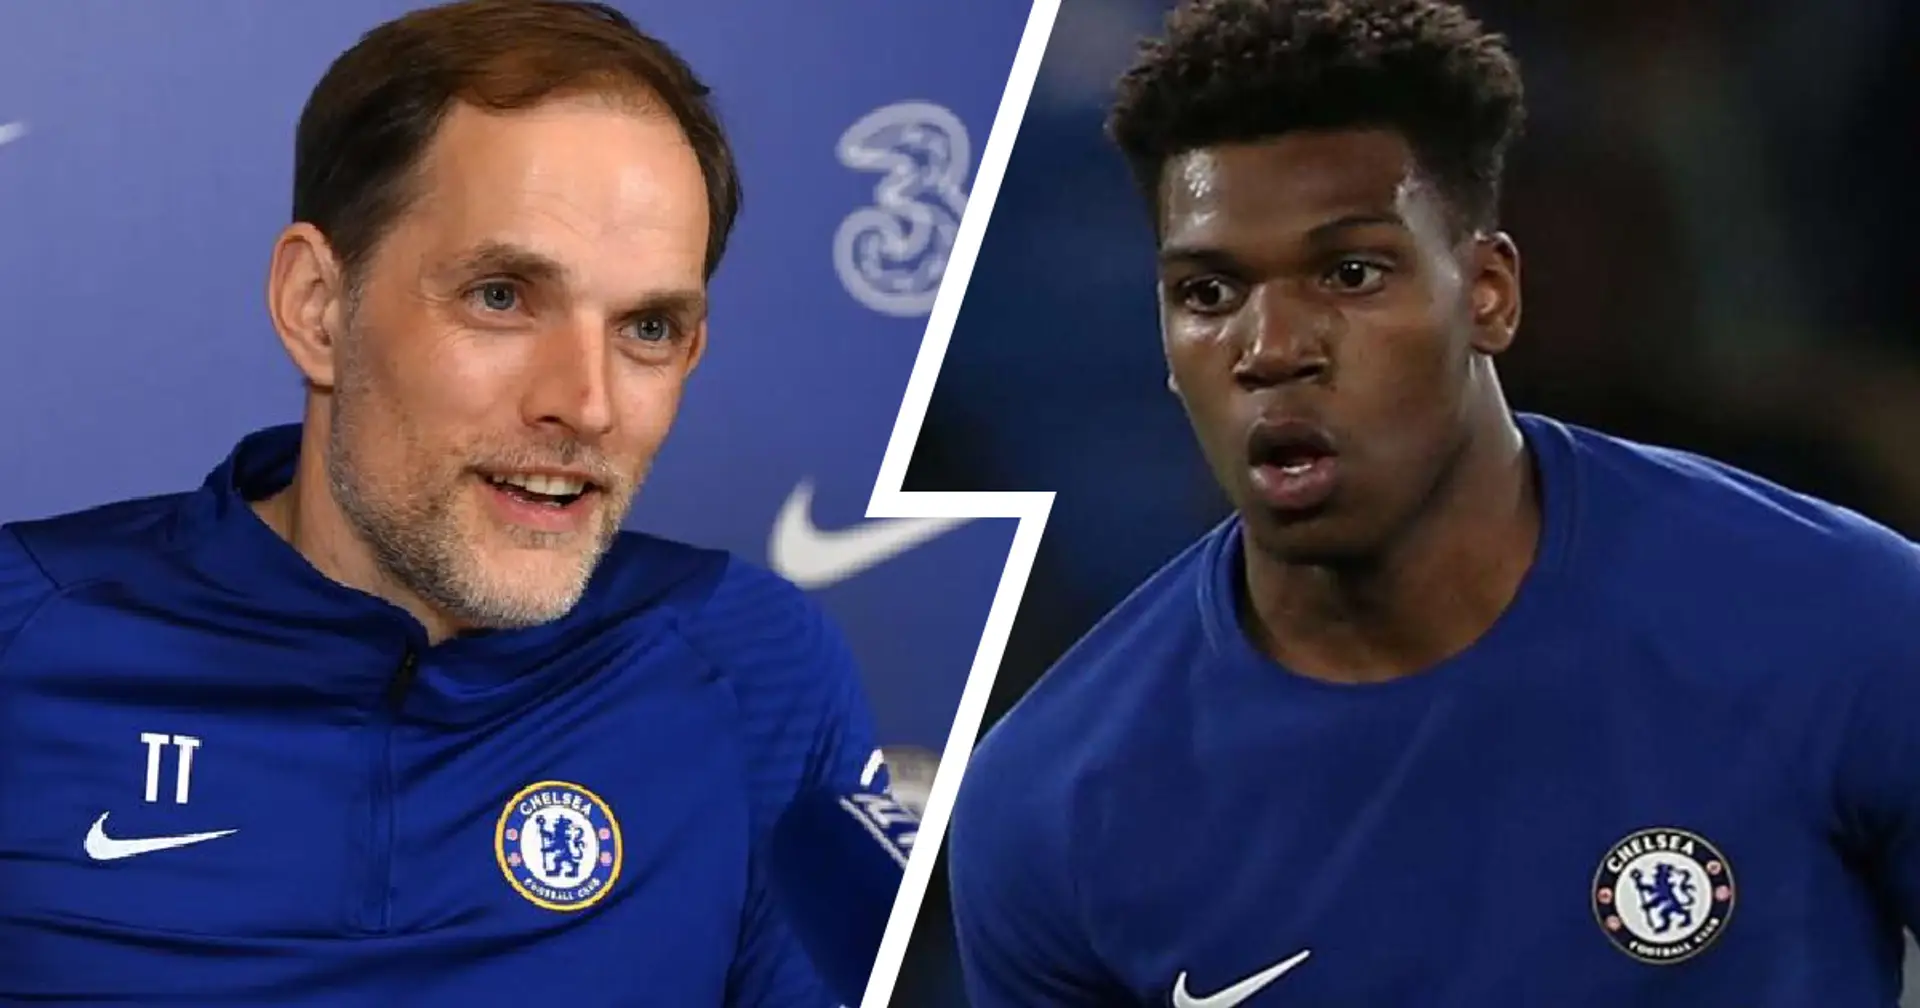 'I know where I need to be to reach that level': Chelsea youngster Dujon Sterling on trying to reach first-team